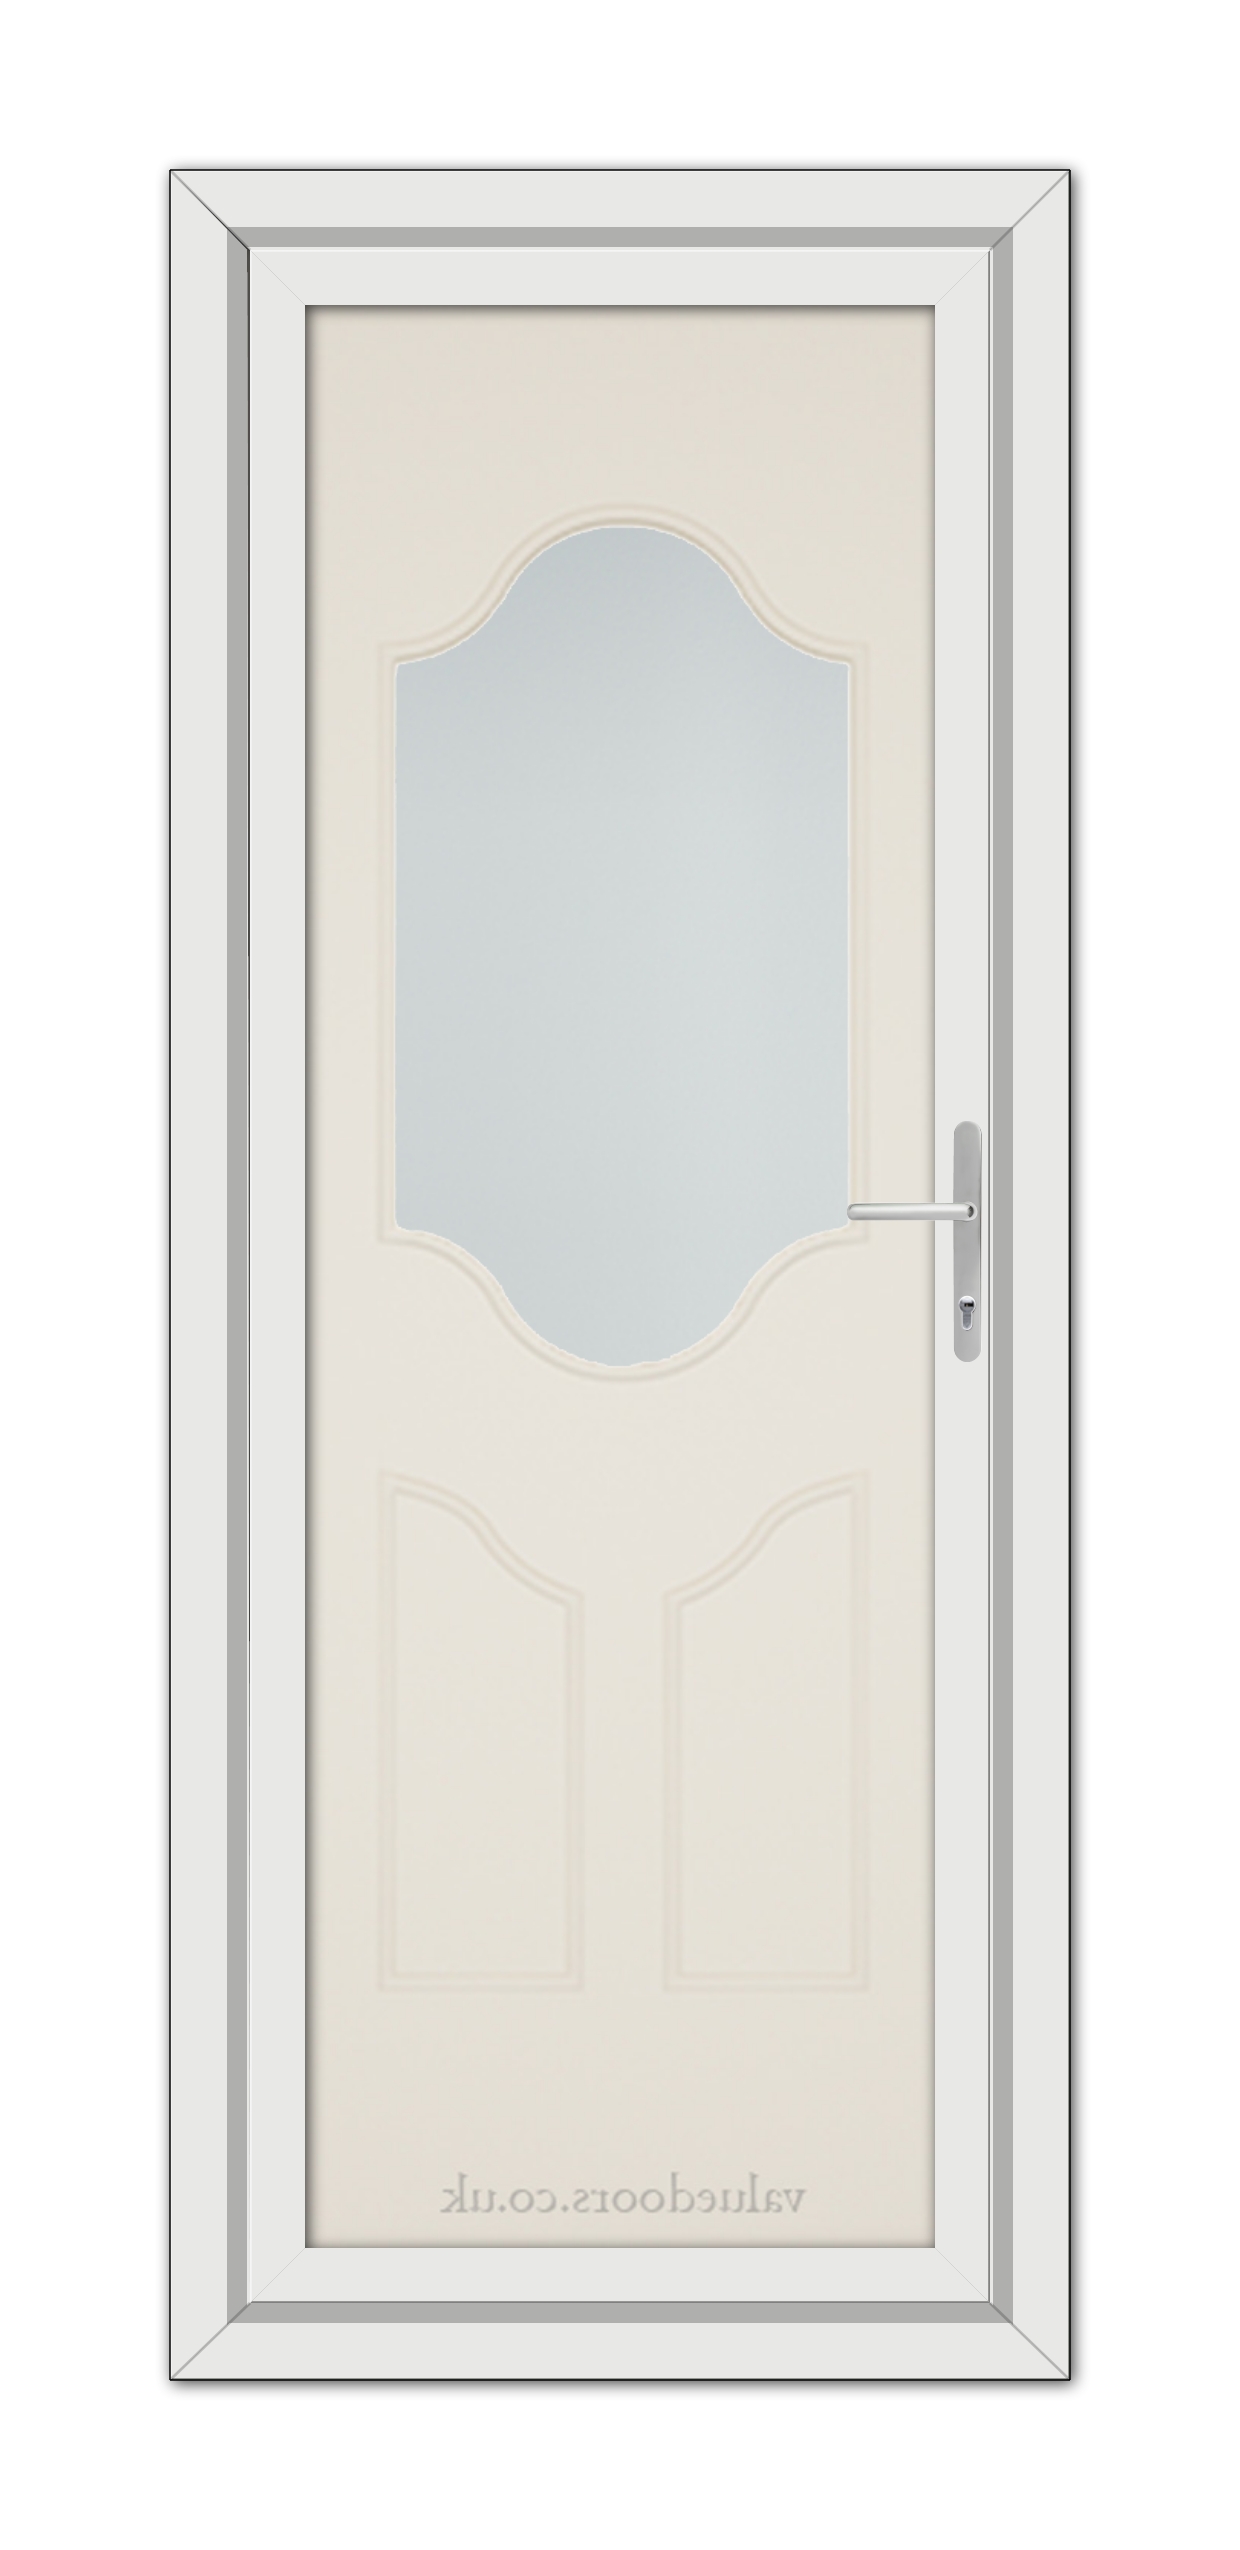 A vertical image of a Cream Althorpe One uPVC Door with an oval glass window in the upper half and decorative panels at the bottom, set within a grey frame.